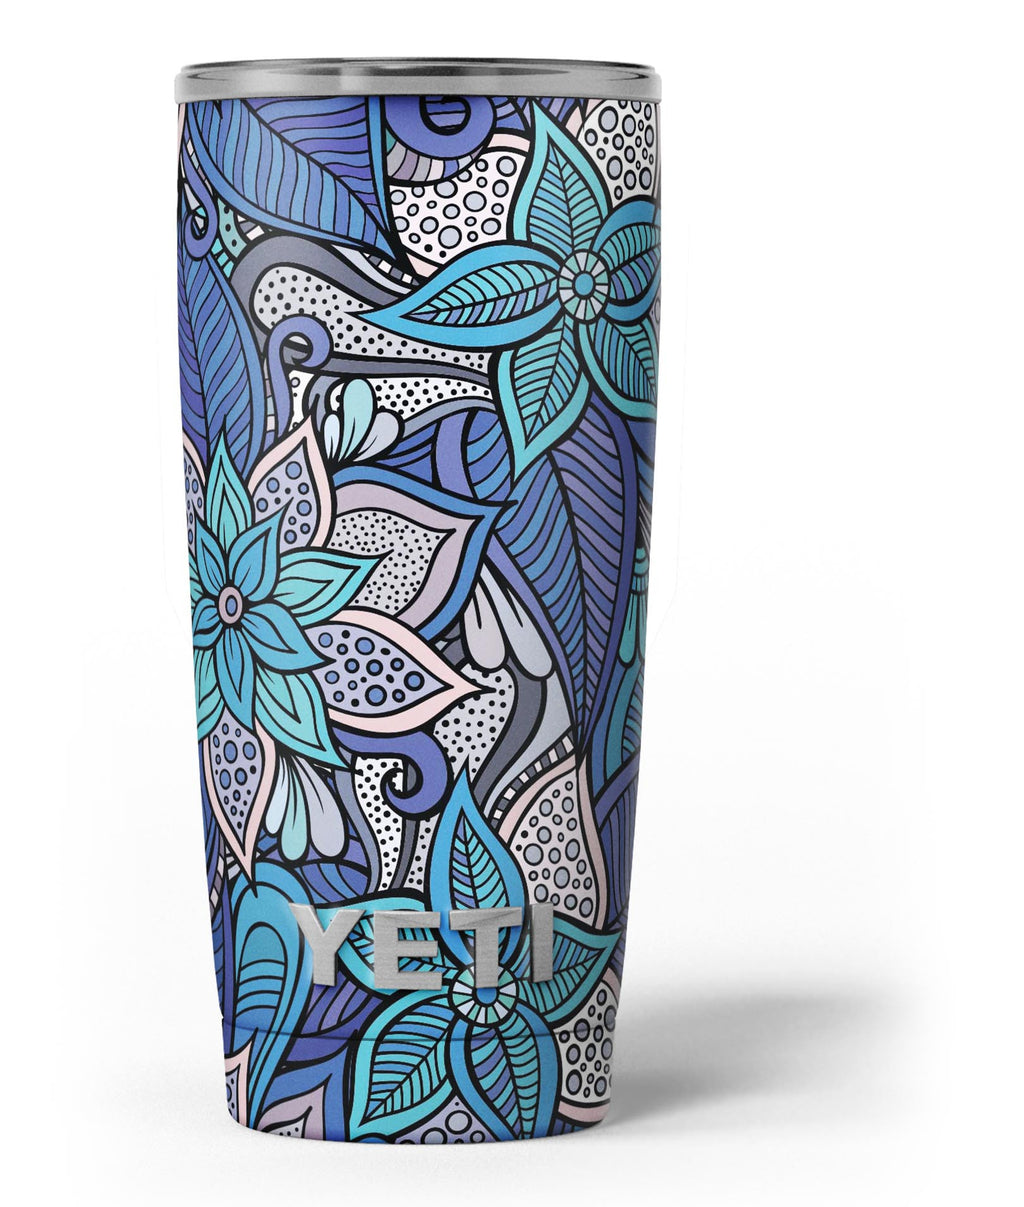 Skin for Yeti Rambler 30 oz Tumbler - Comfy Christmas by FP - Sticker Decal Wrap